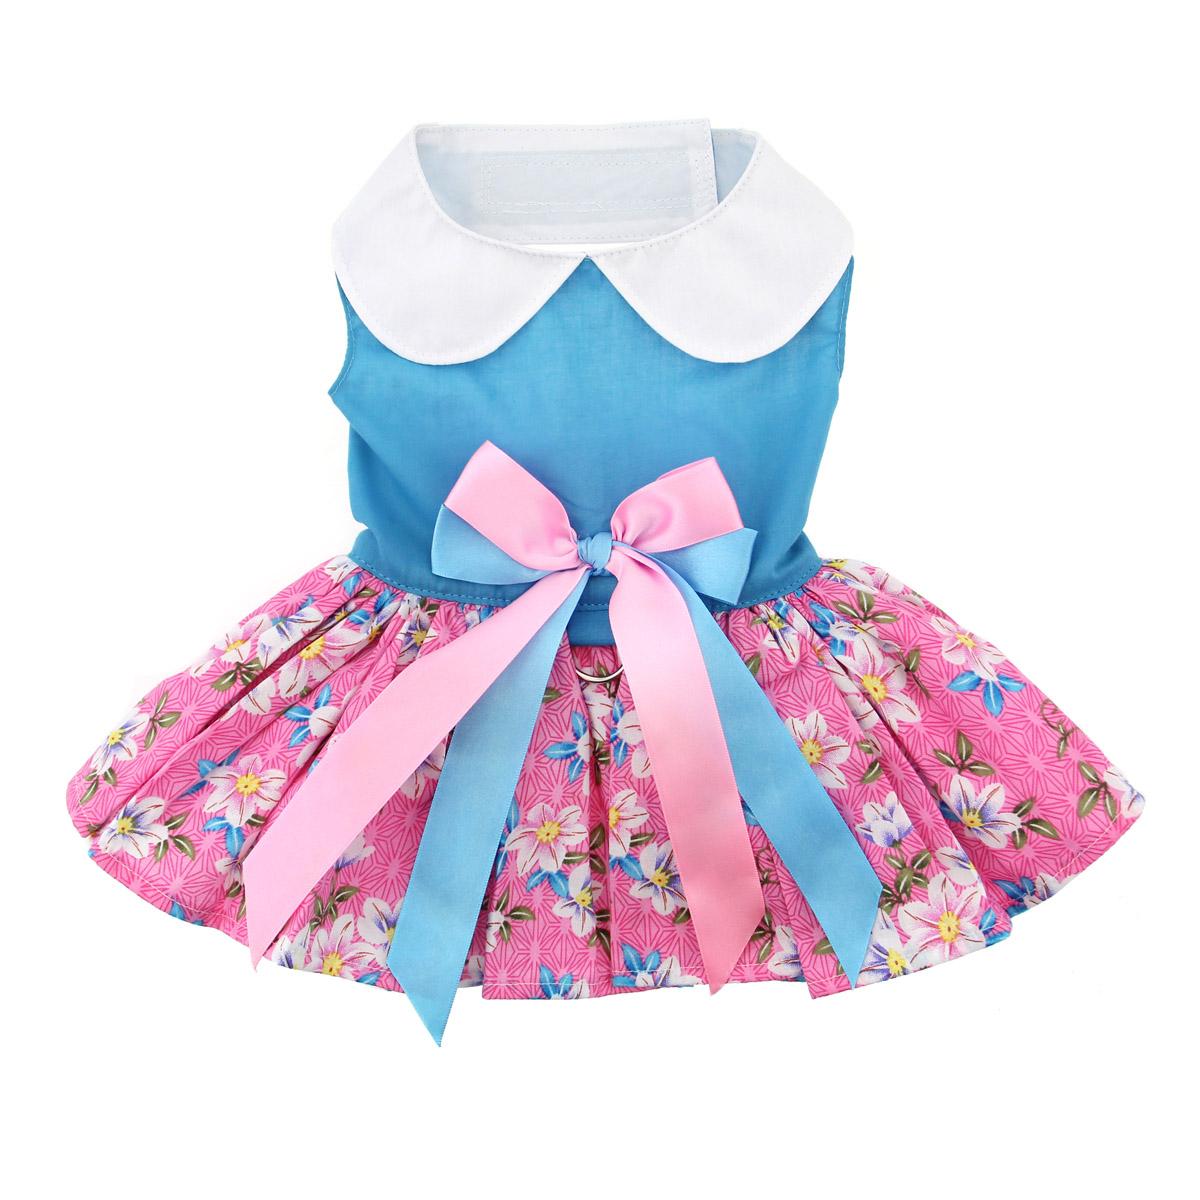 Pink and Blue Plumeria Dog Harness Dress by Doggie Design